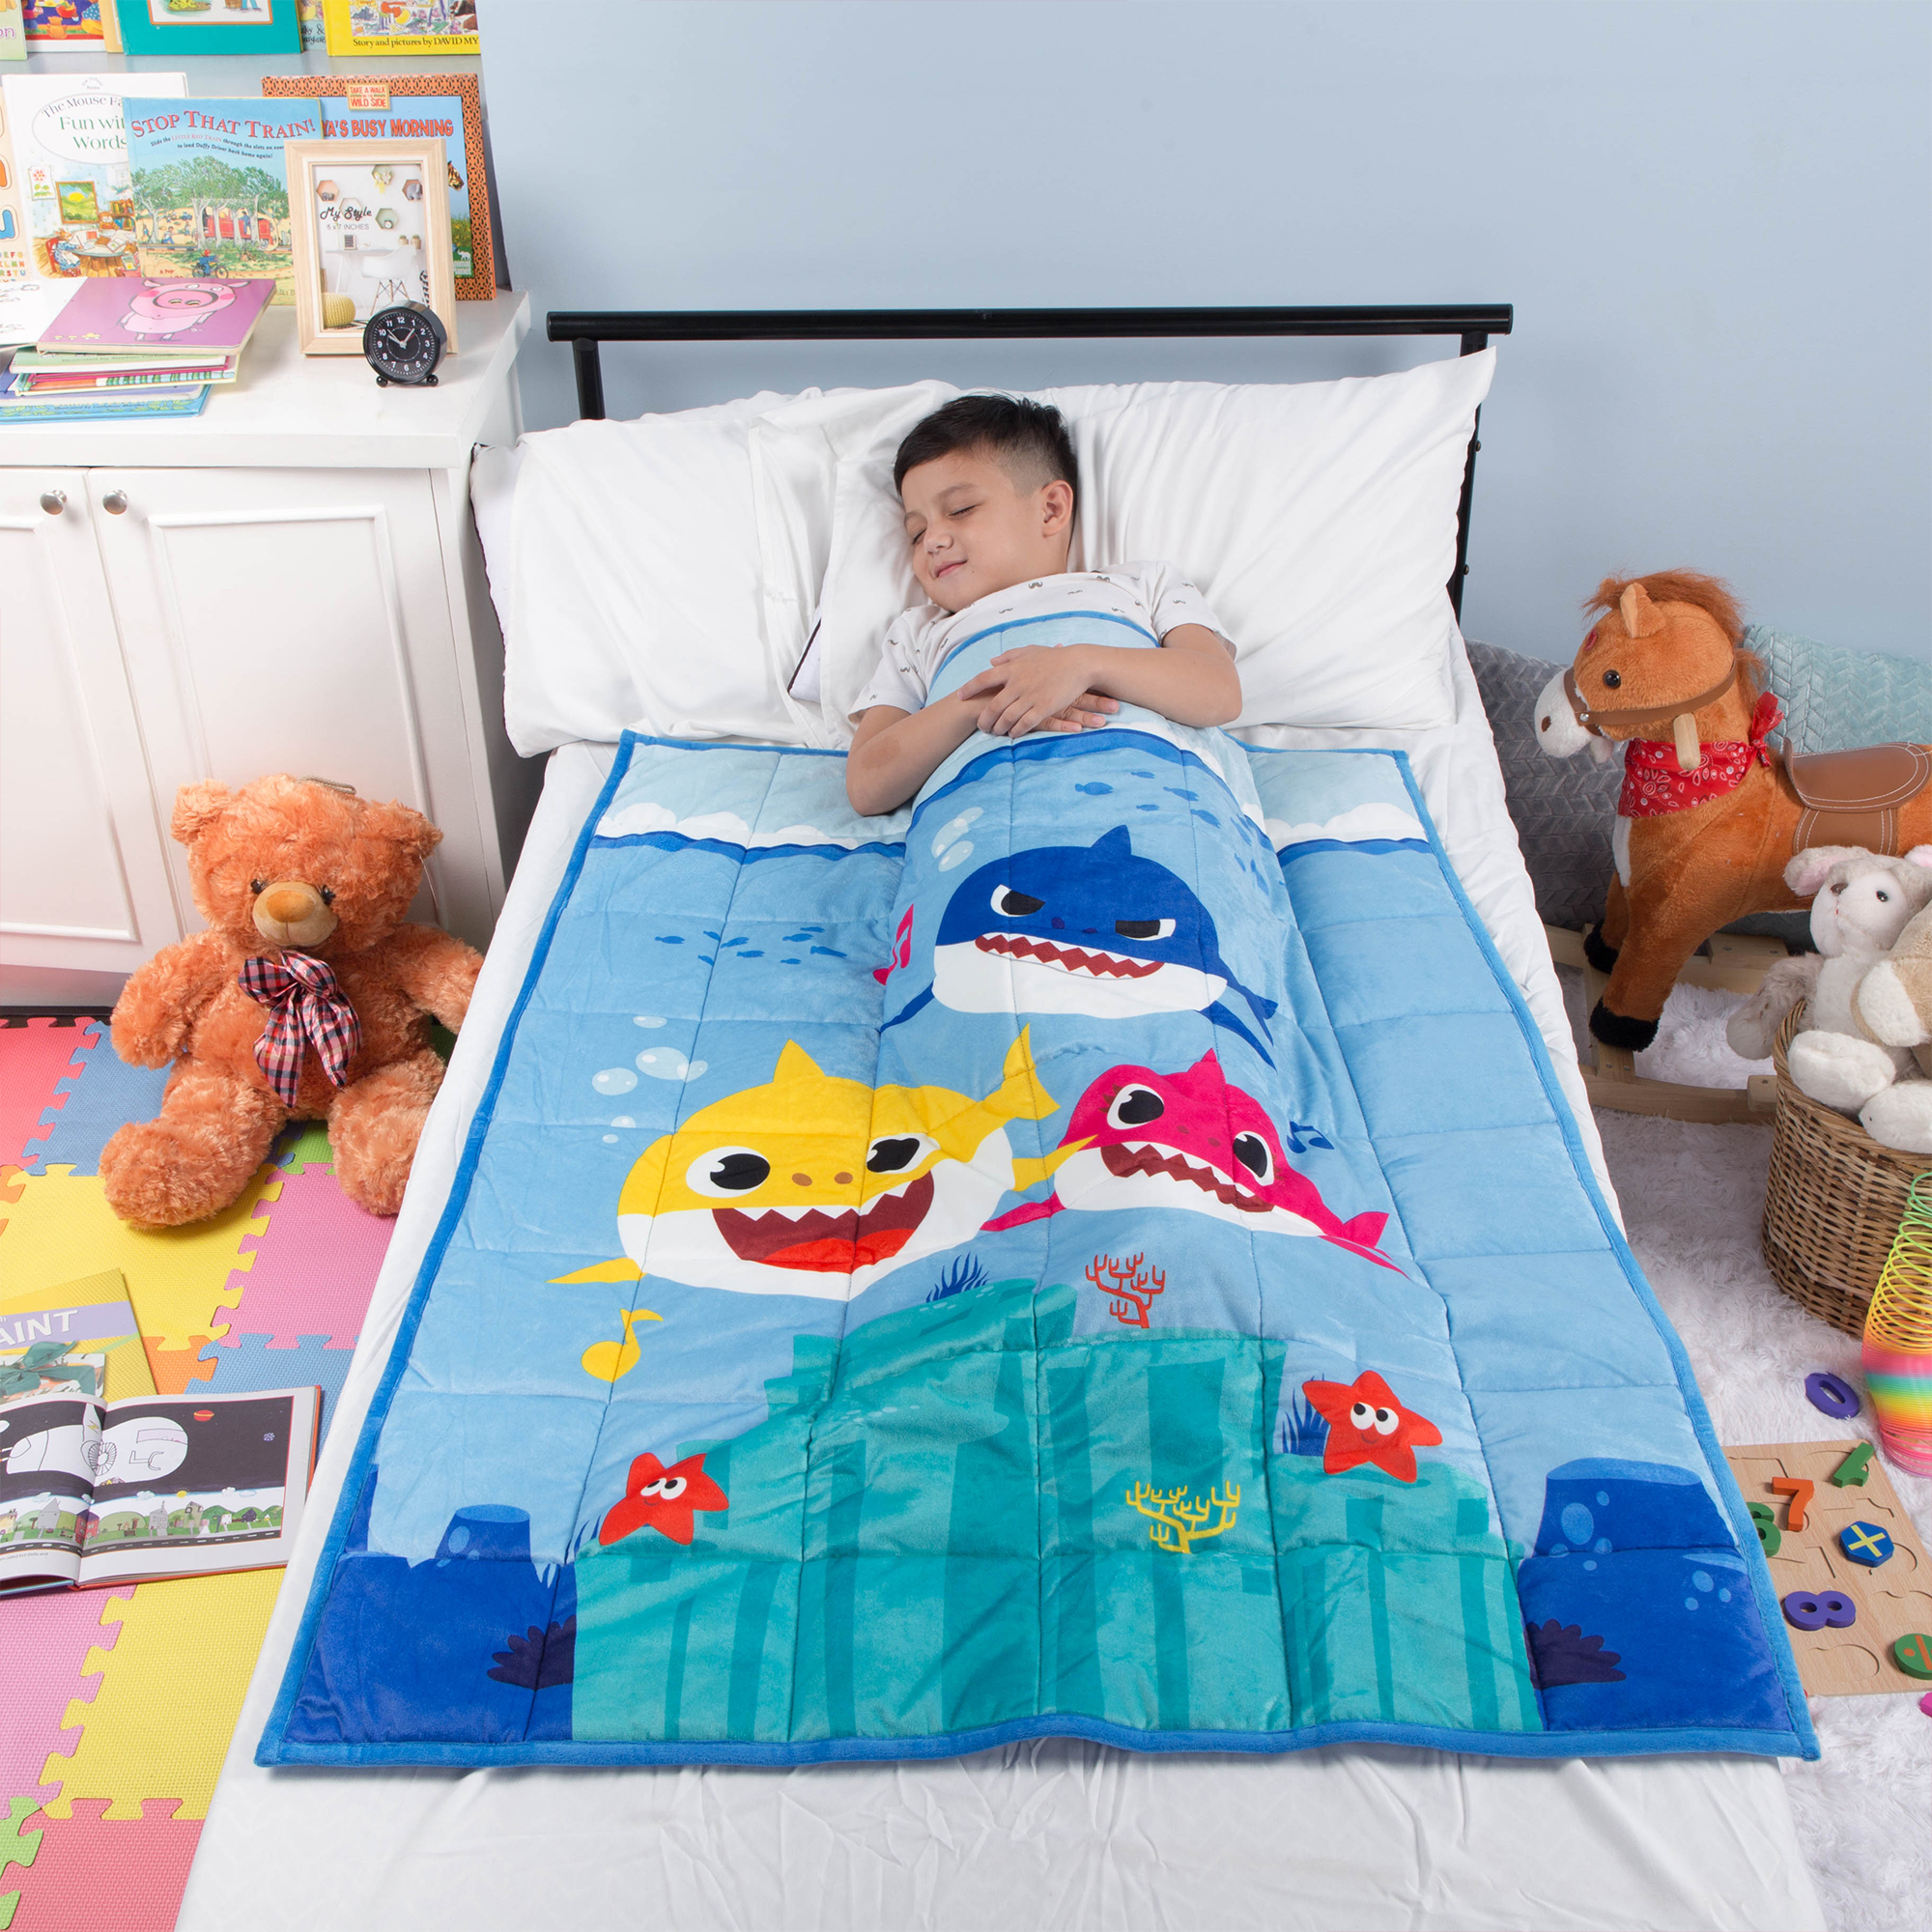 Baby Shark Kids Weighted Blanket, Super Soft Plush Bedding, 36" x 48" 4.5lbs, Blue - image 1 of 11